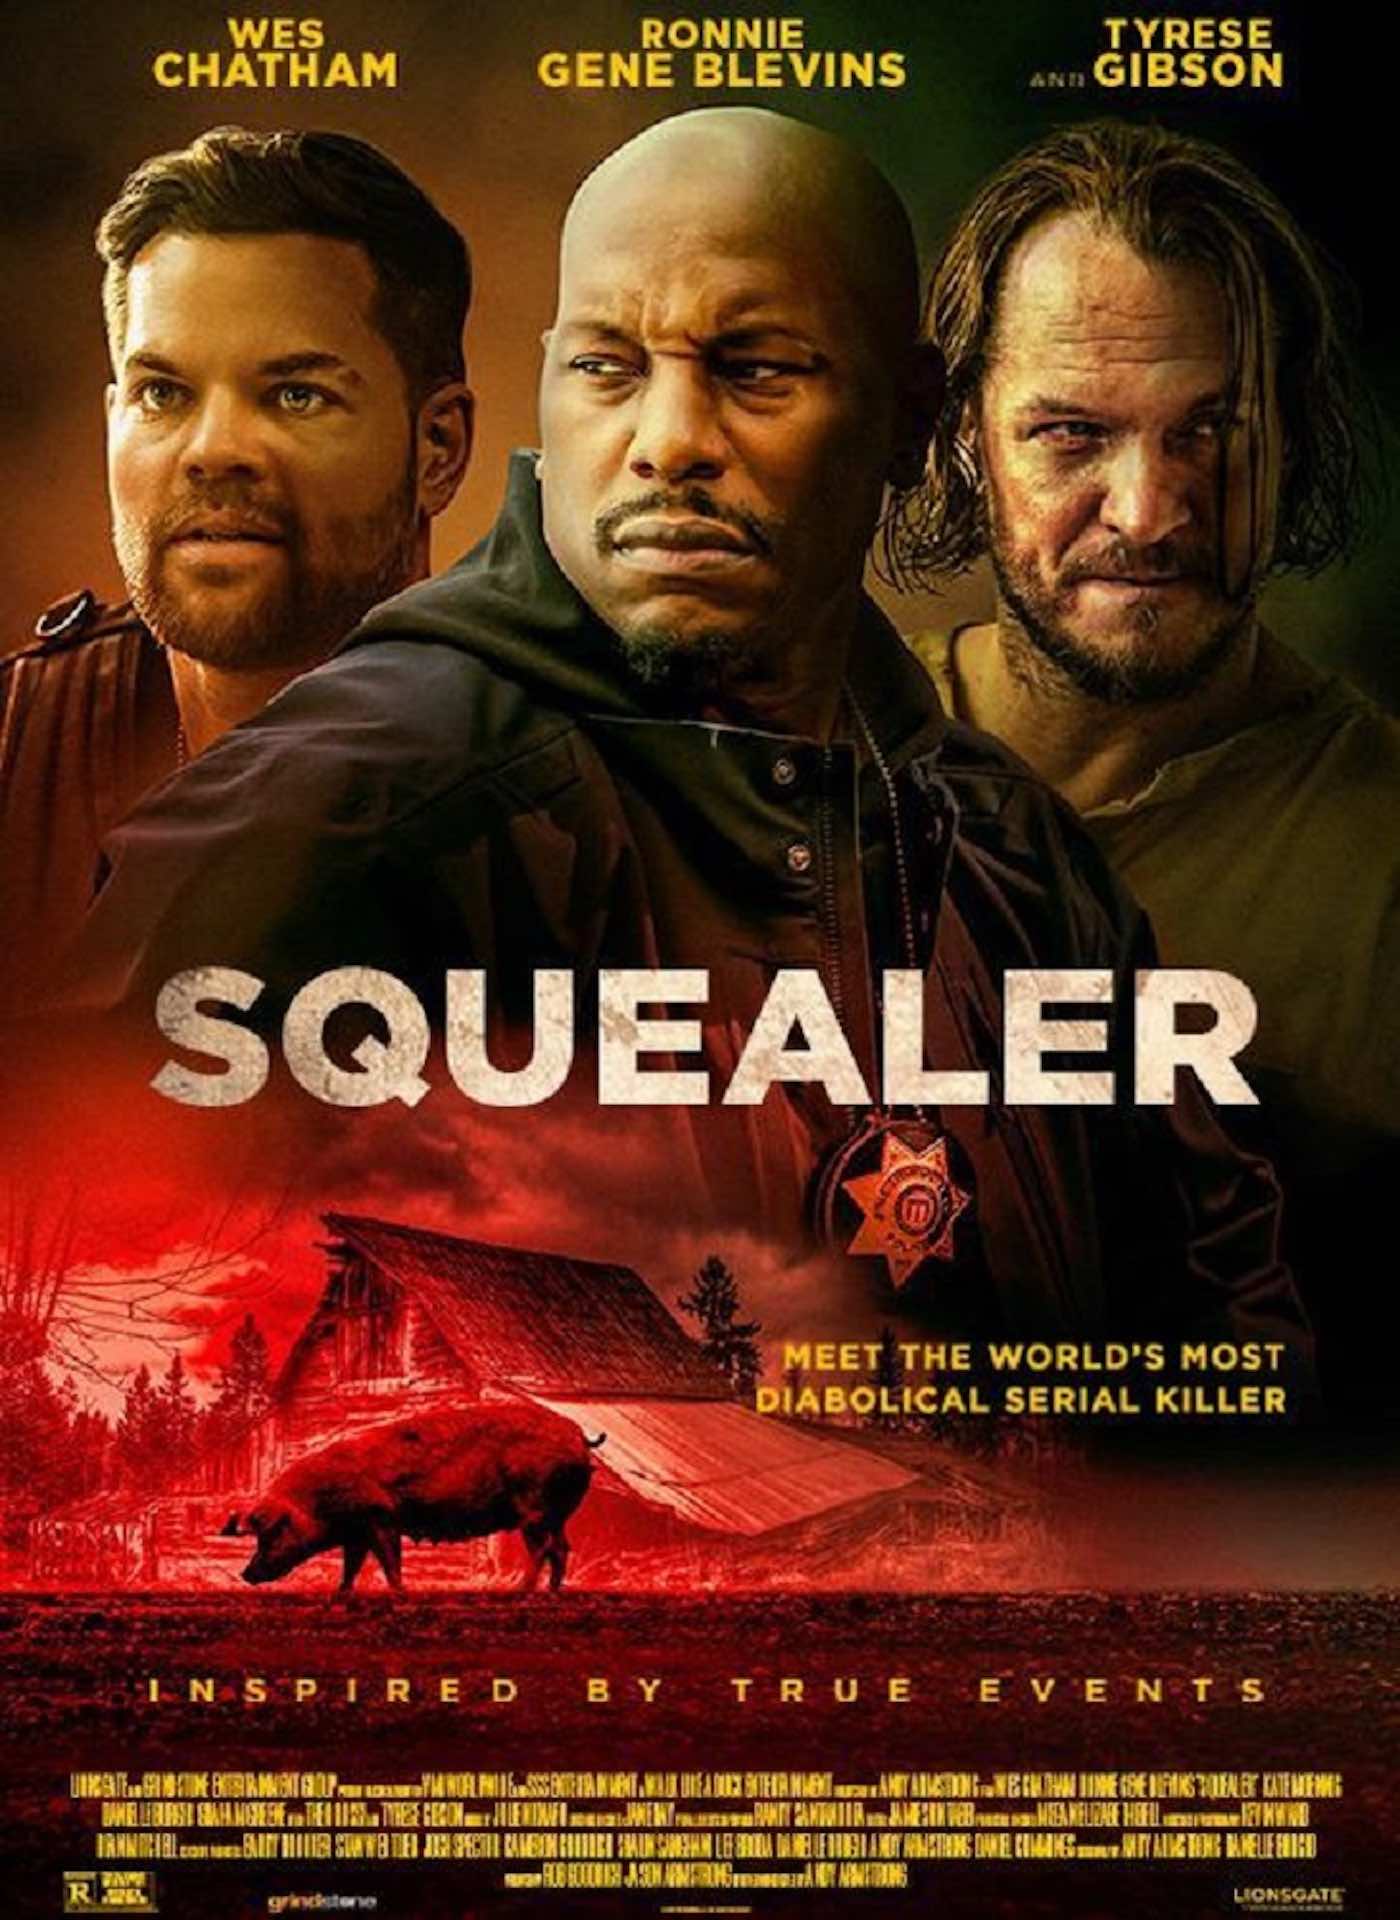 THEATRICAL POSTER FOR SQUEALER.